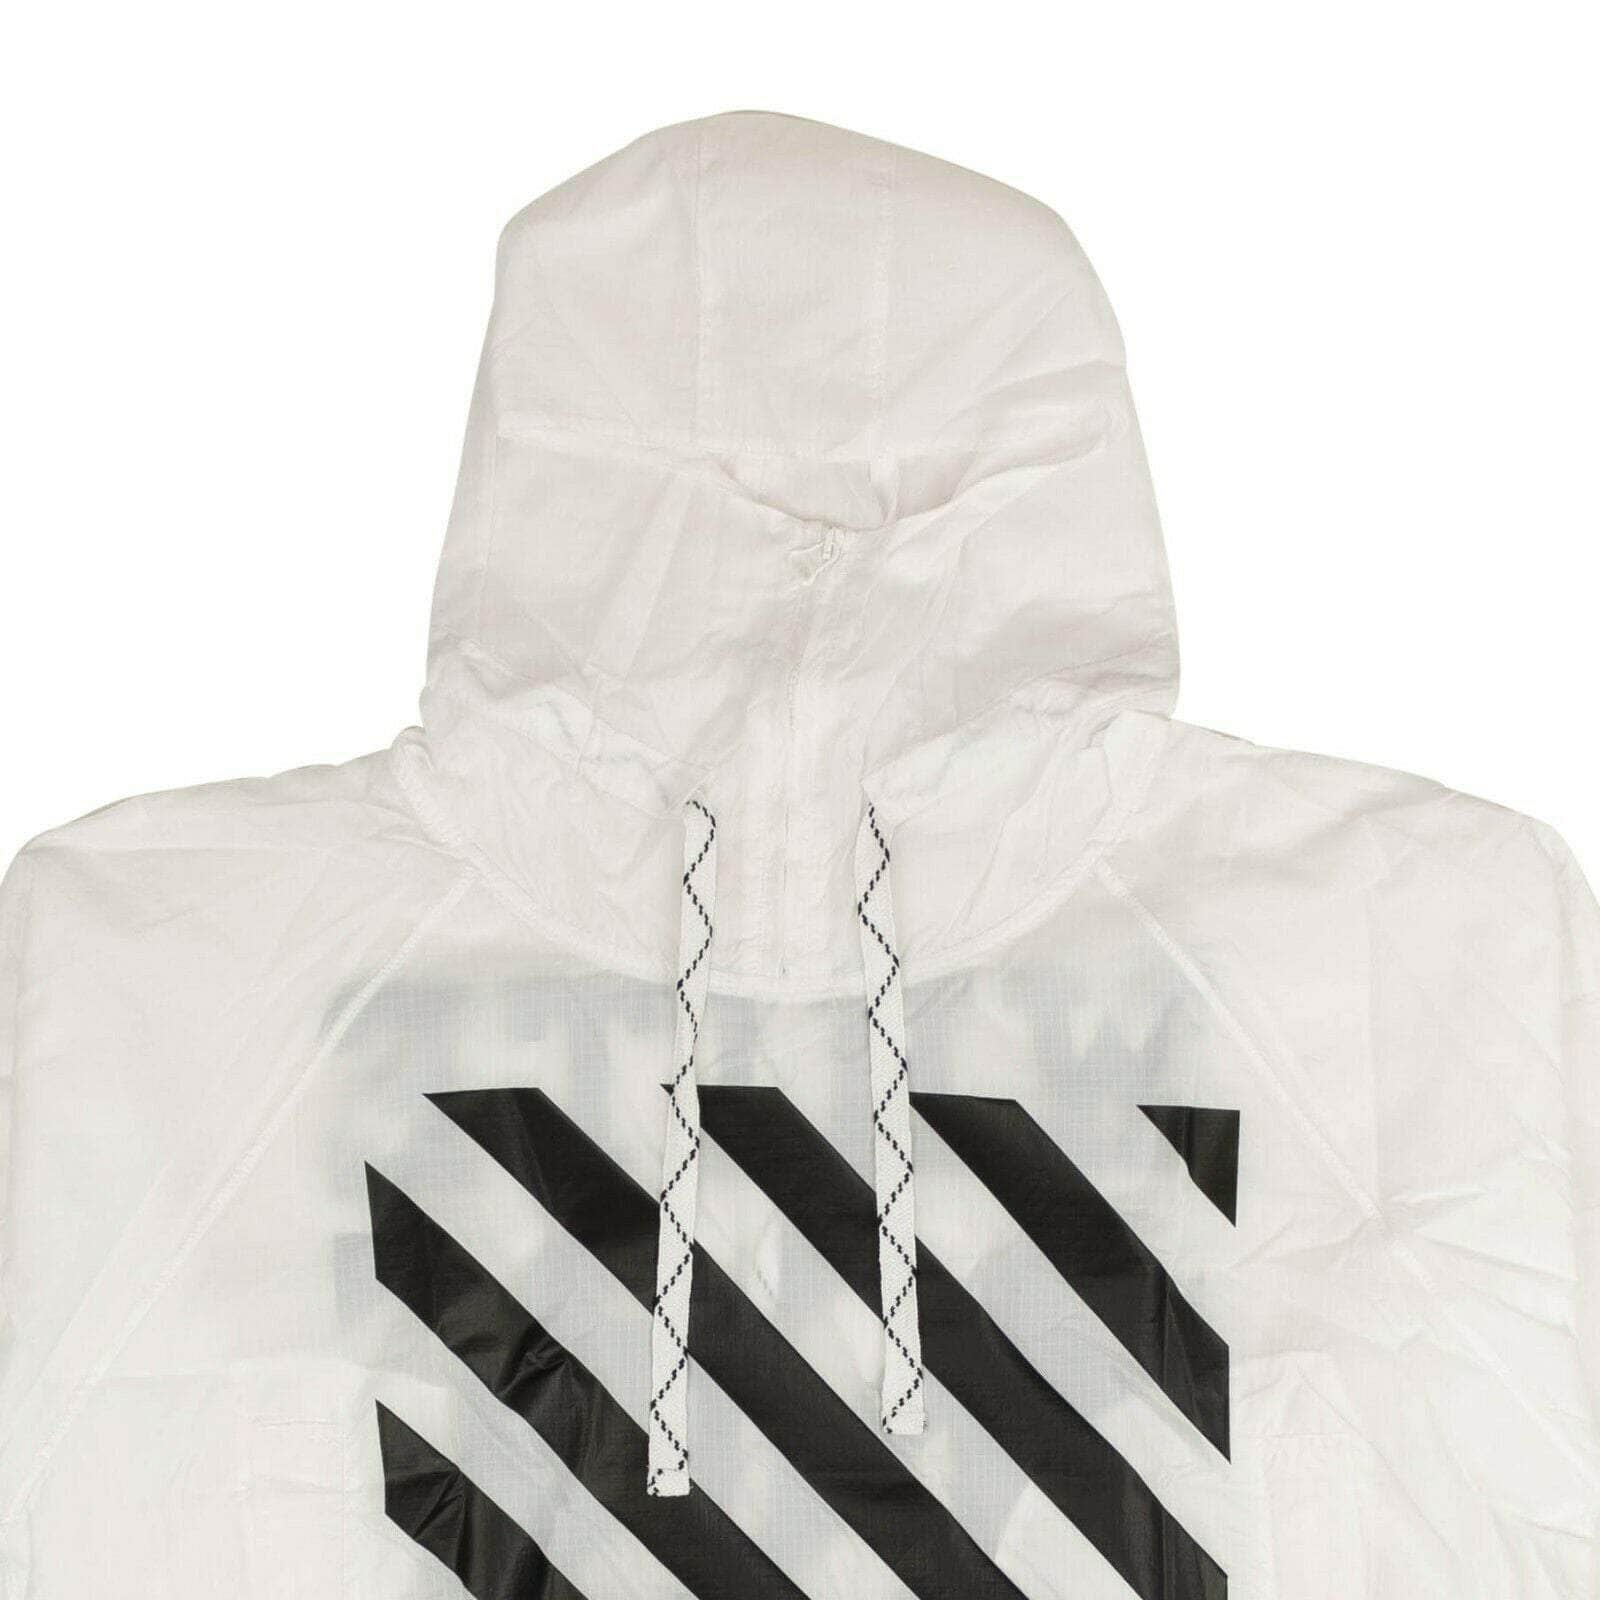 OFF-WHITE c/o VIRGIL ABLOH 1000-2000, channelenable-all, chicmi, couponcollection, gender-mens, main-clothing, mens-field-jackets, mens-shoes, off-white-c-o-virgil-abloh, size-xxs White Diagonal Anorack Jacket